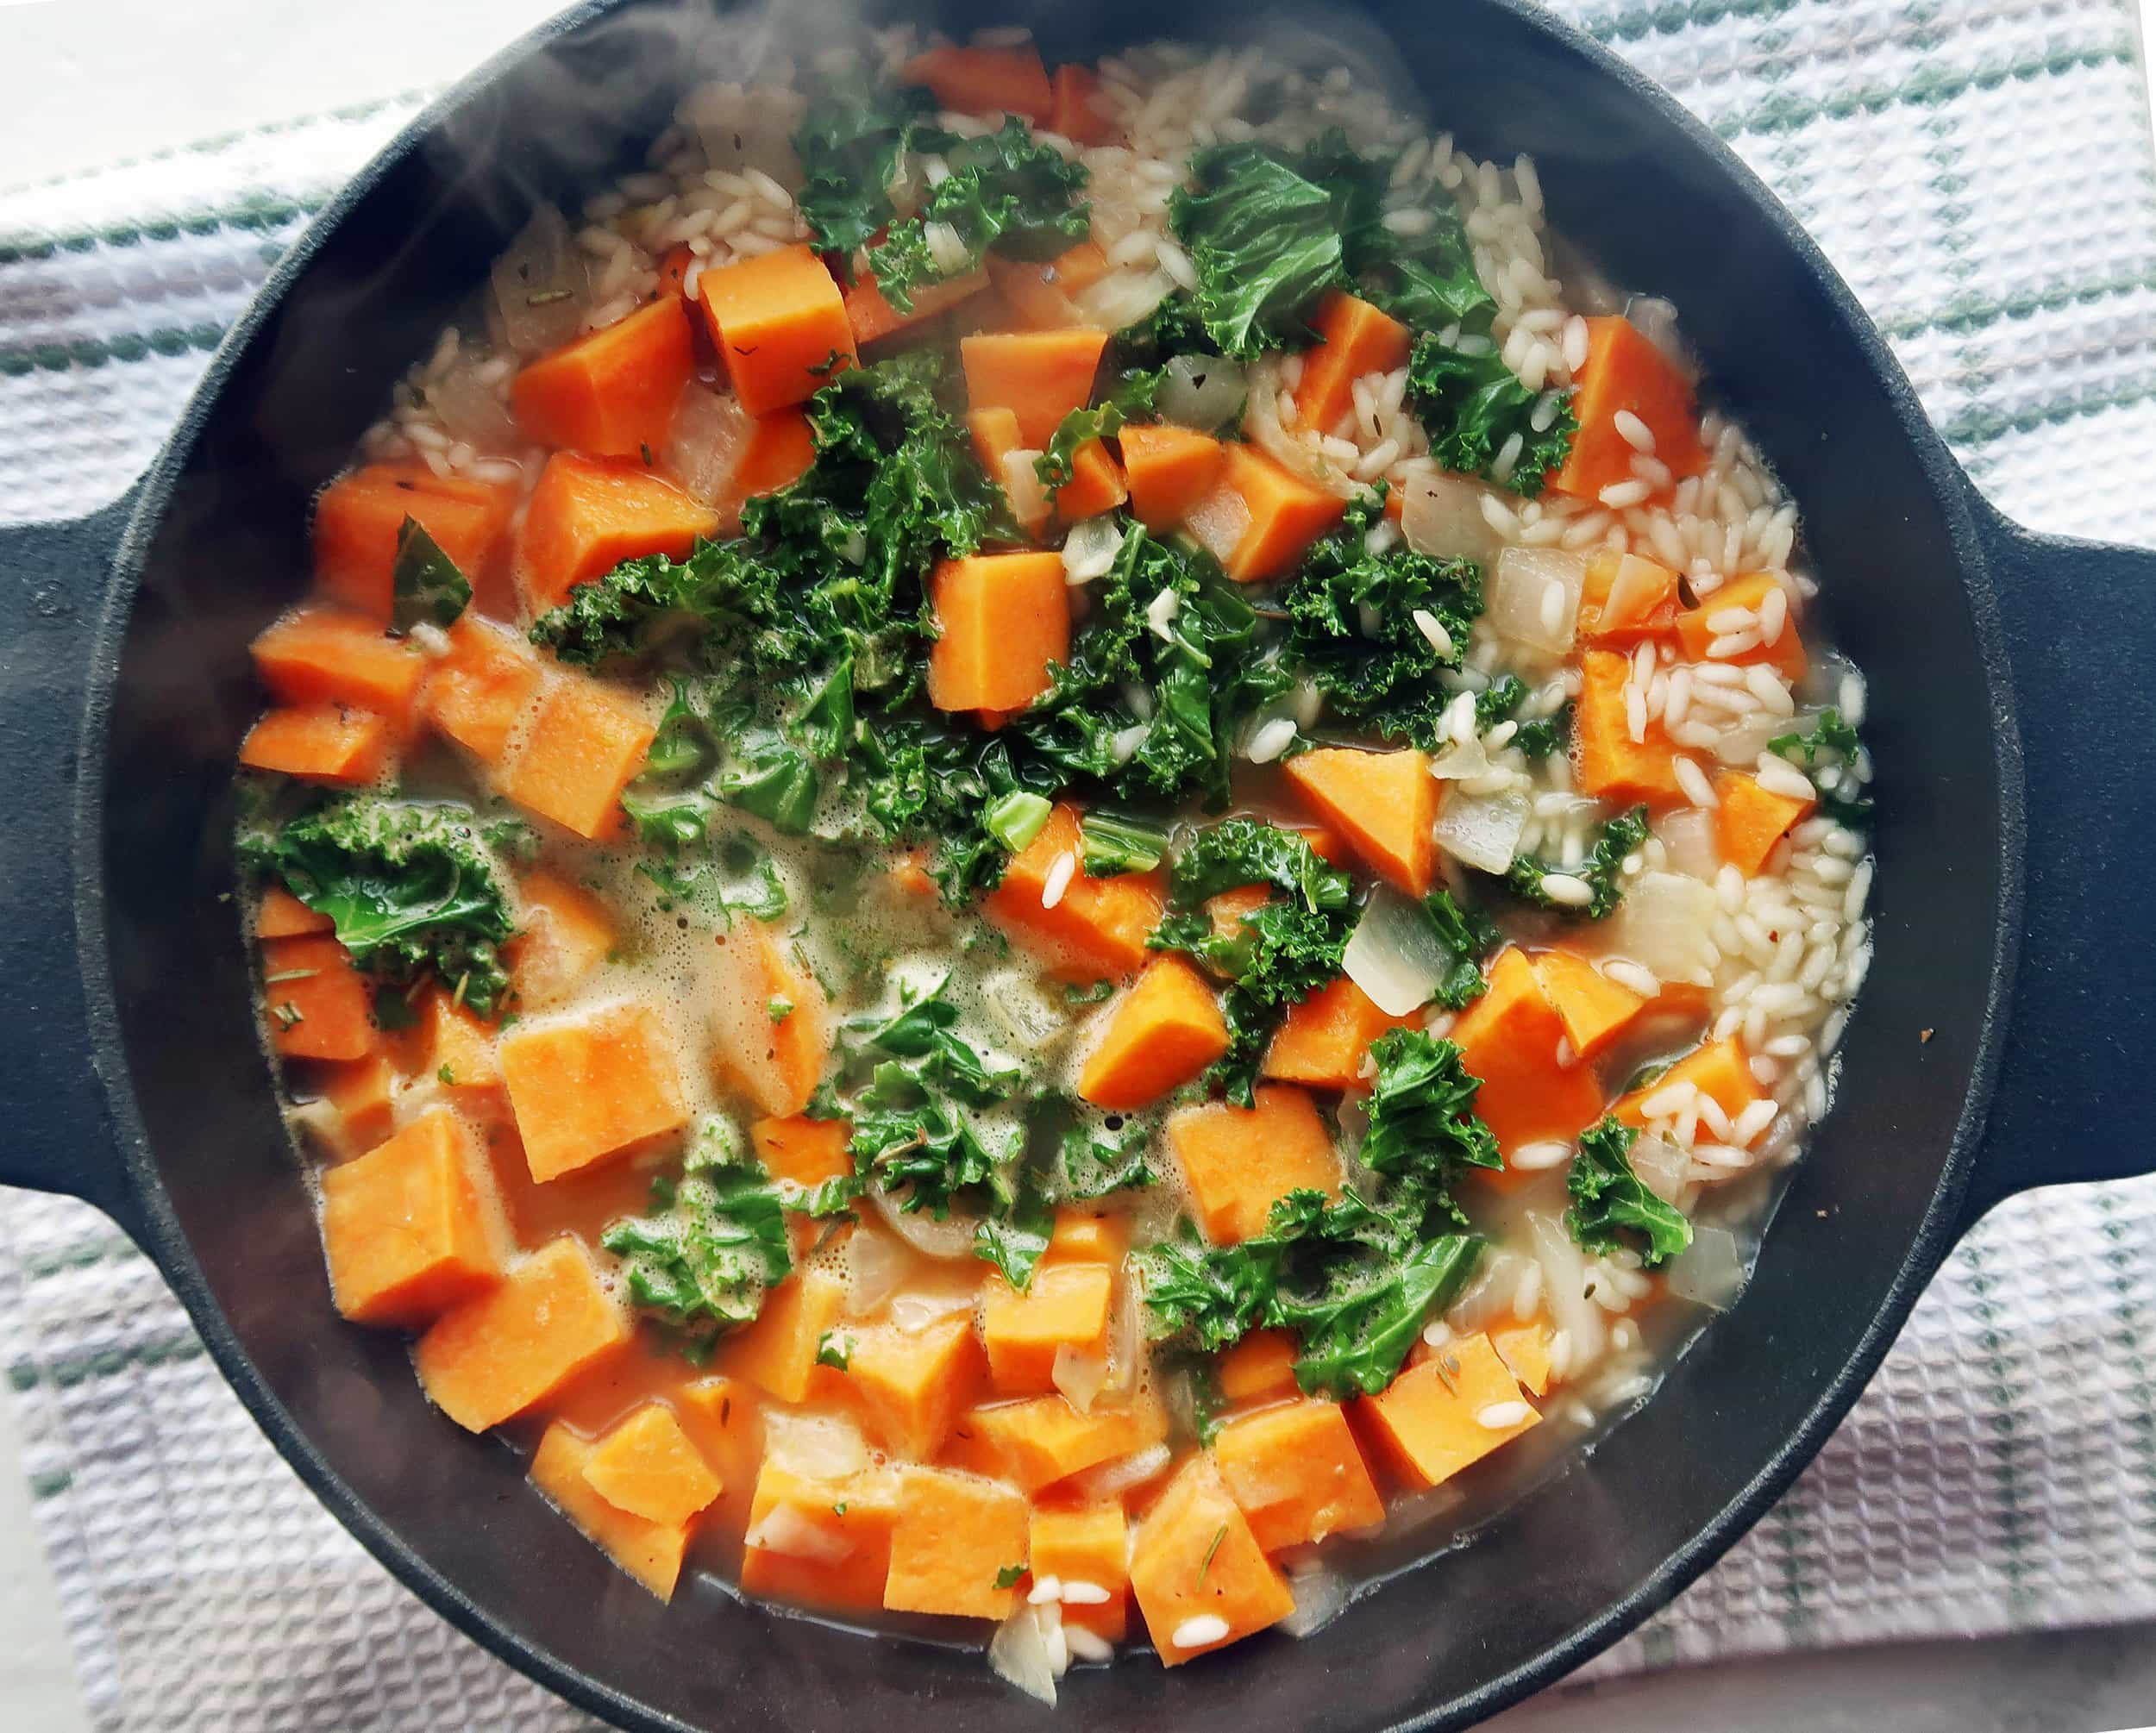 A Dutch oven full of sweet potato, kale, arborio rice, and vegetable broth.